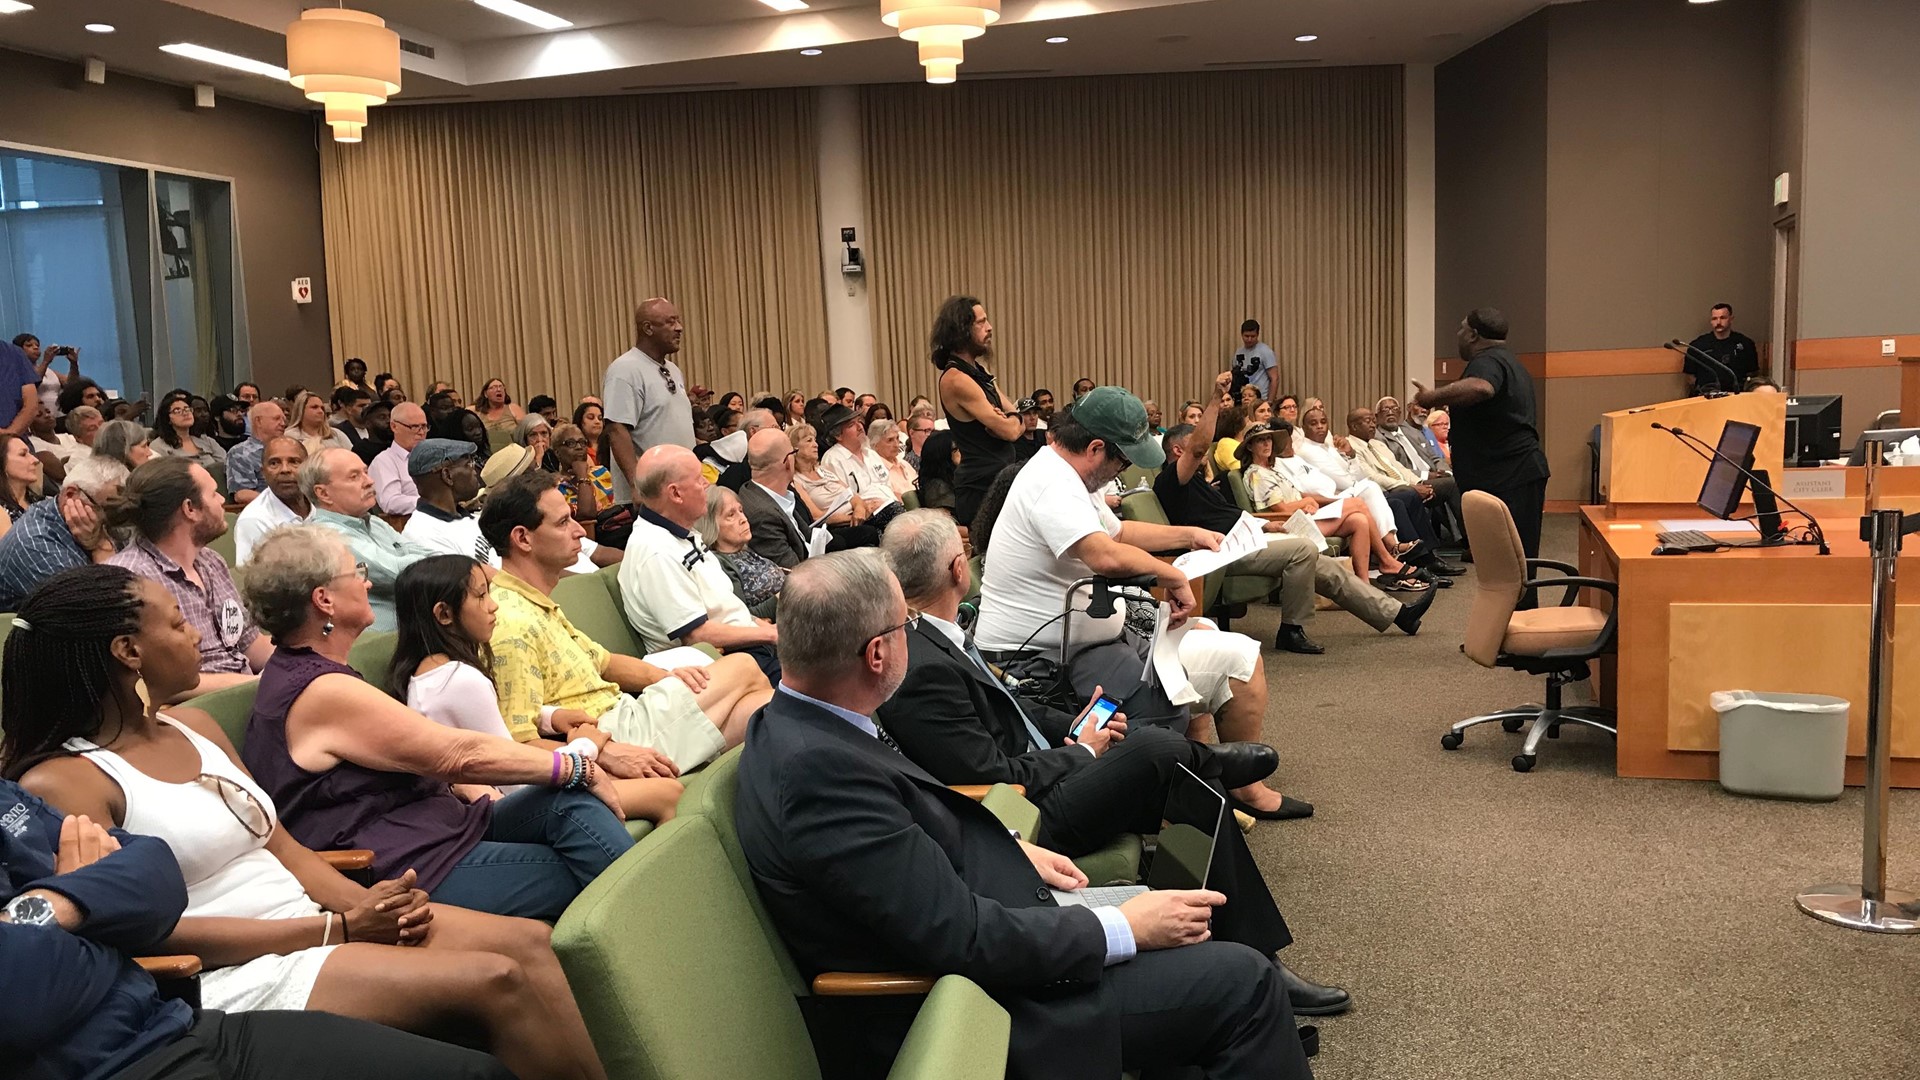 The Sacramento City Council voted to approve both proposed homeless shelter sites; one under the W-X Freeway near Alhambra and Broadway and the other in the Meadowview neighborhood on the south side of the city.